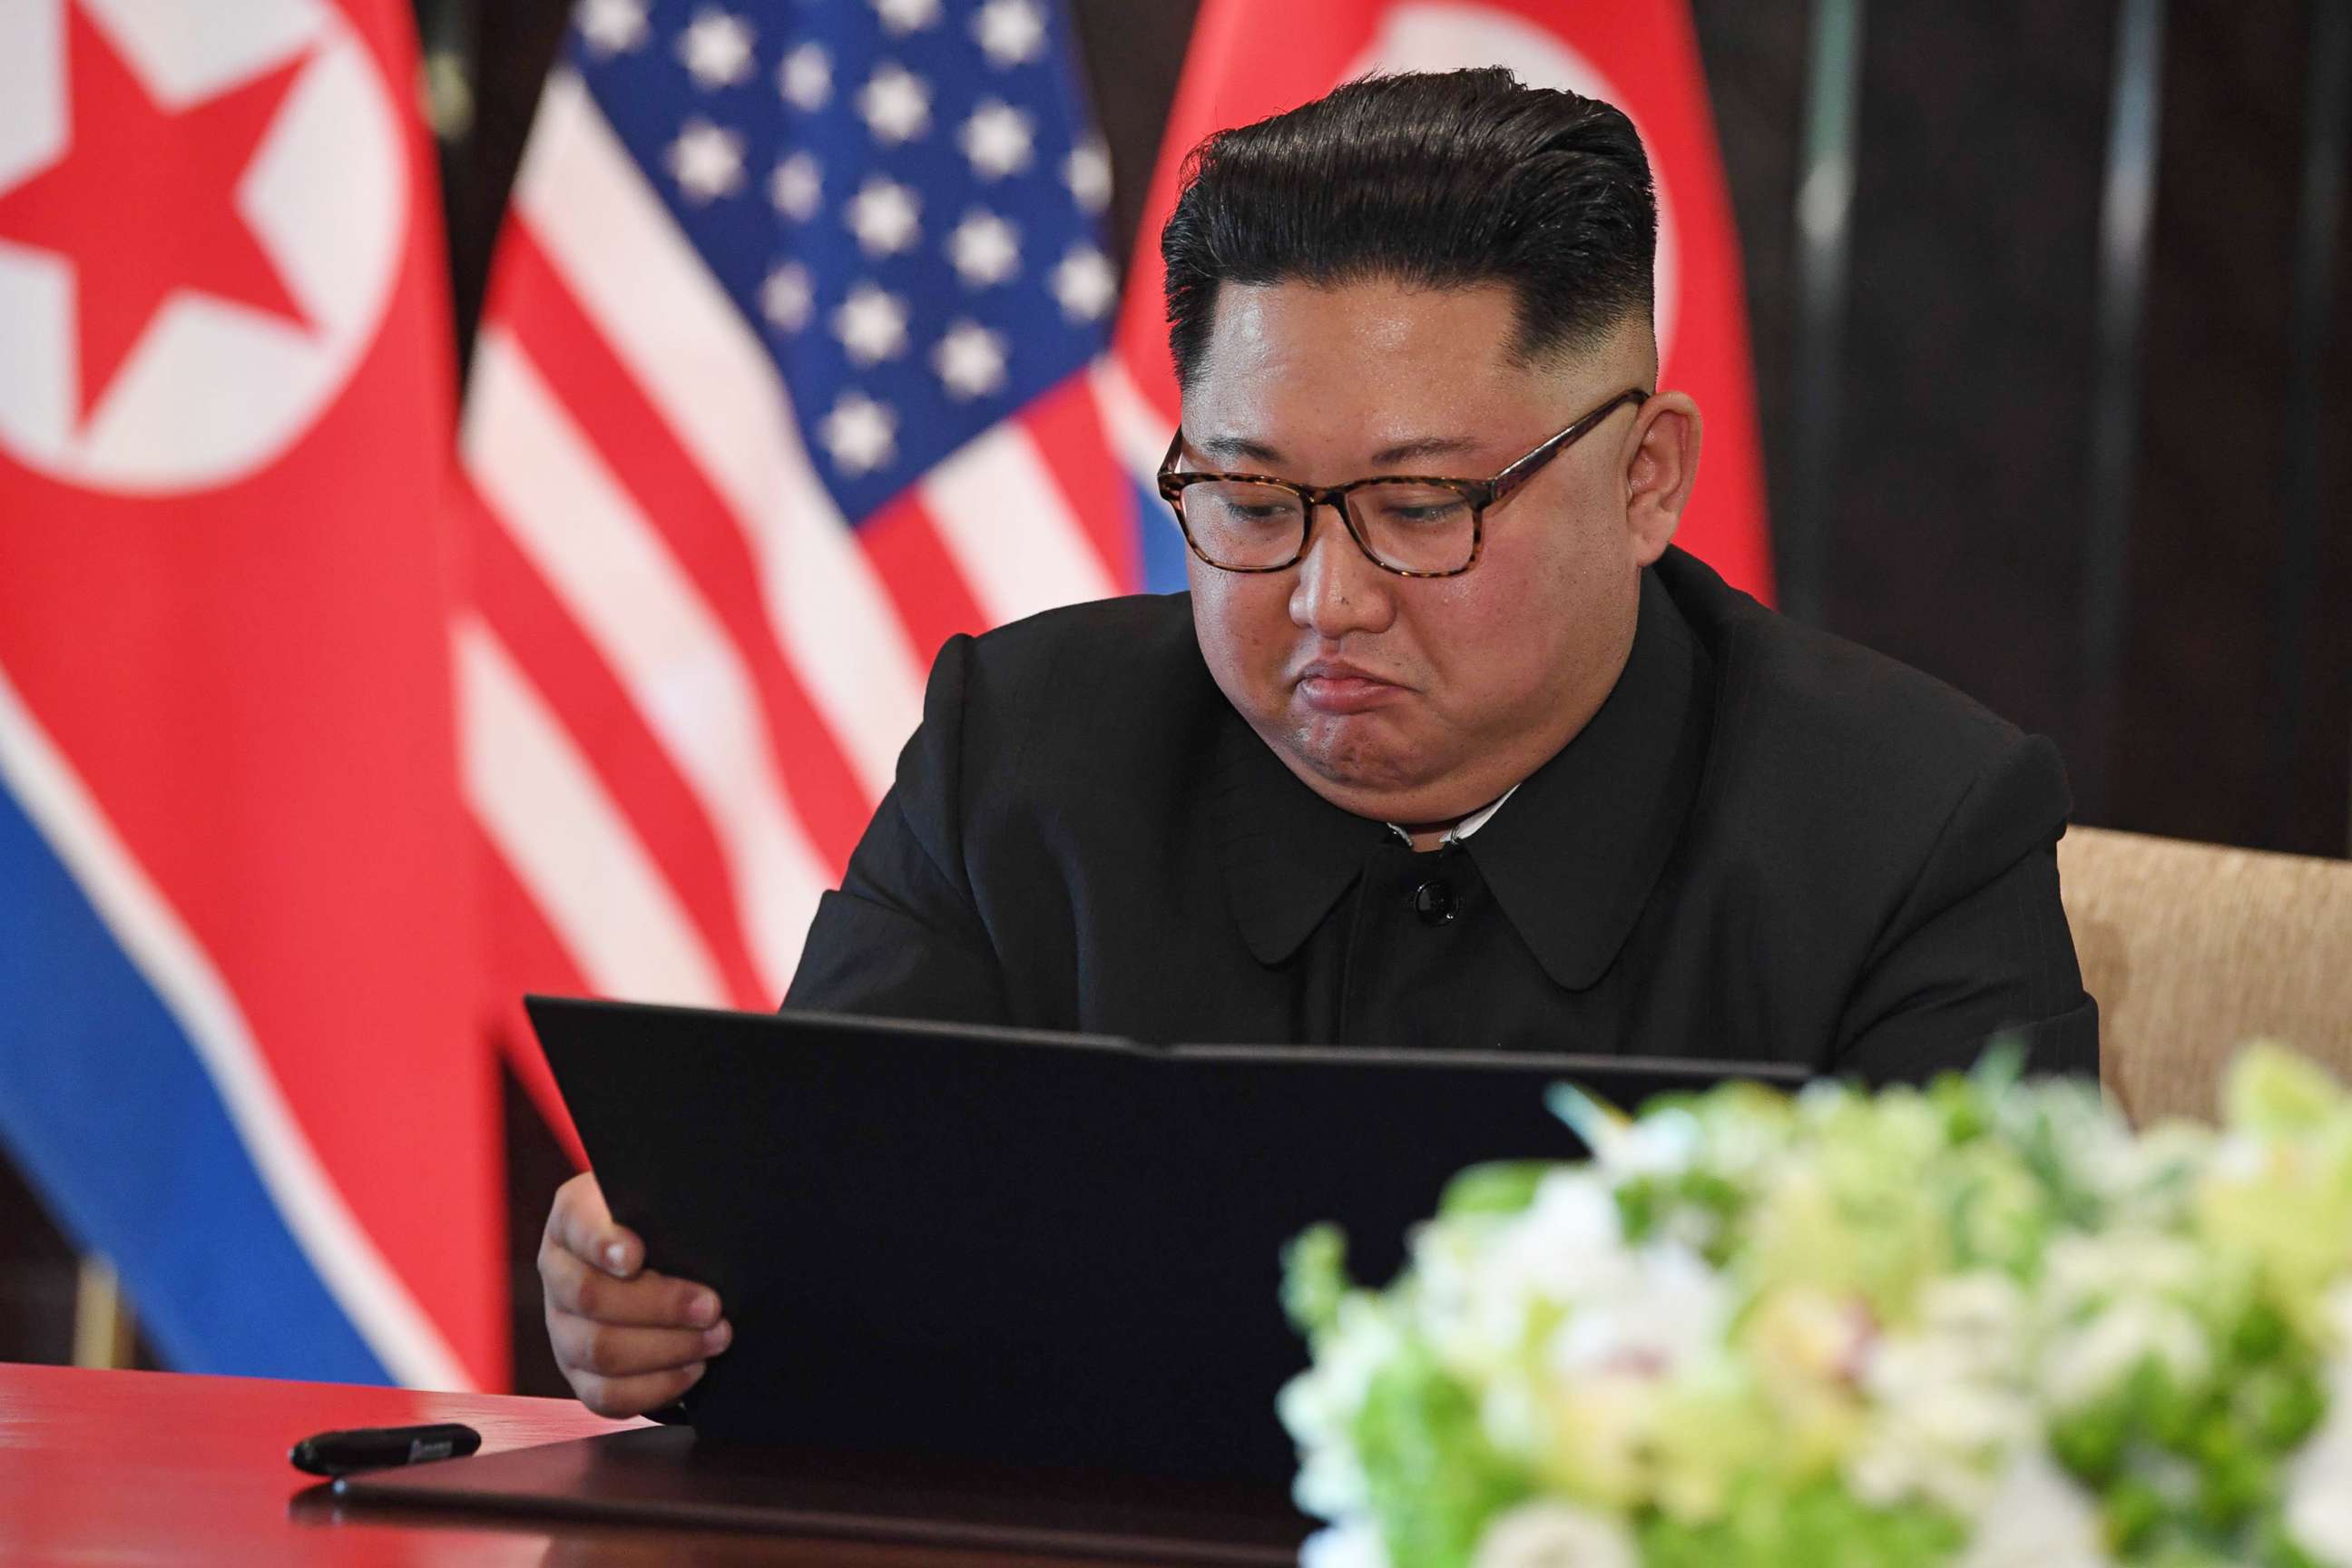 PHOTO: North Korea's leader Kim Jong Un looks at his document at a signing ceremony with President Donald Trump during their summit at the Capella Hotel on Sentosa island in Singapore on June 12, 2018.